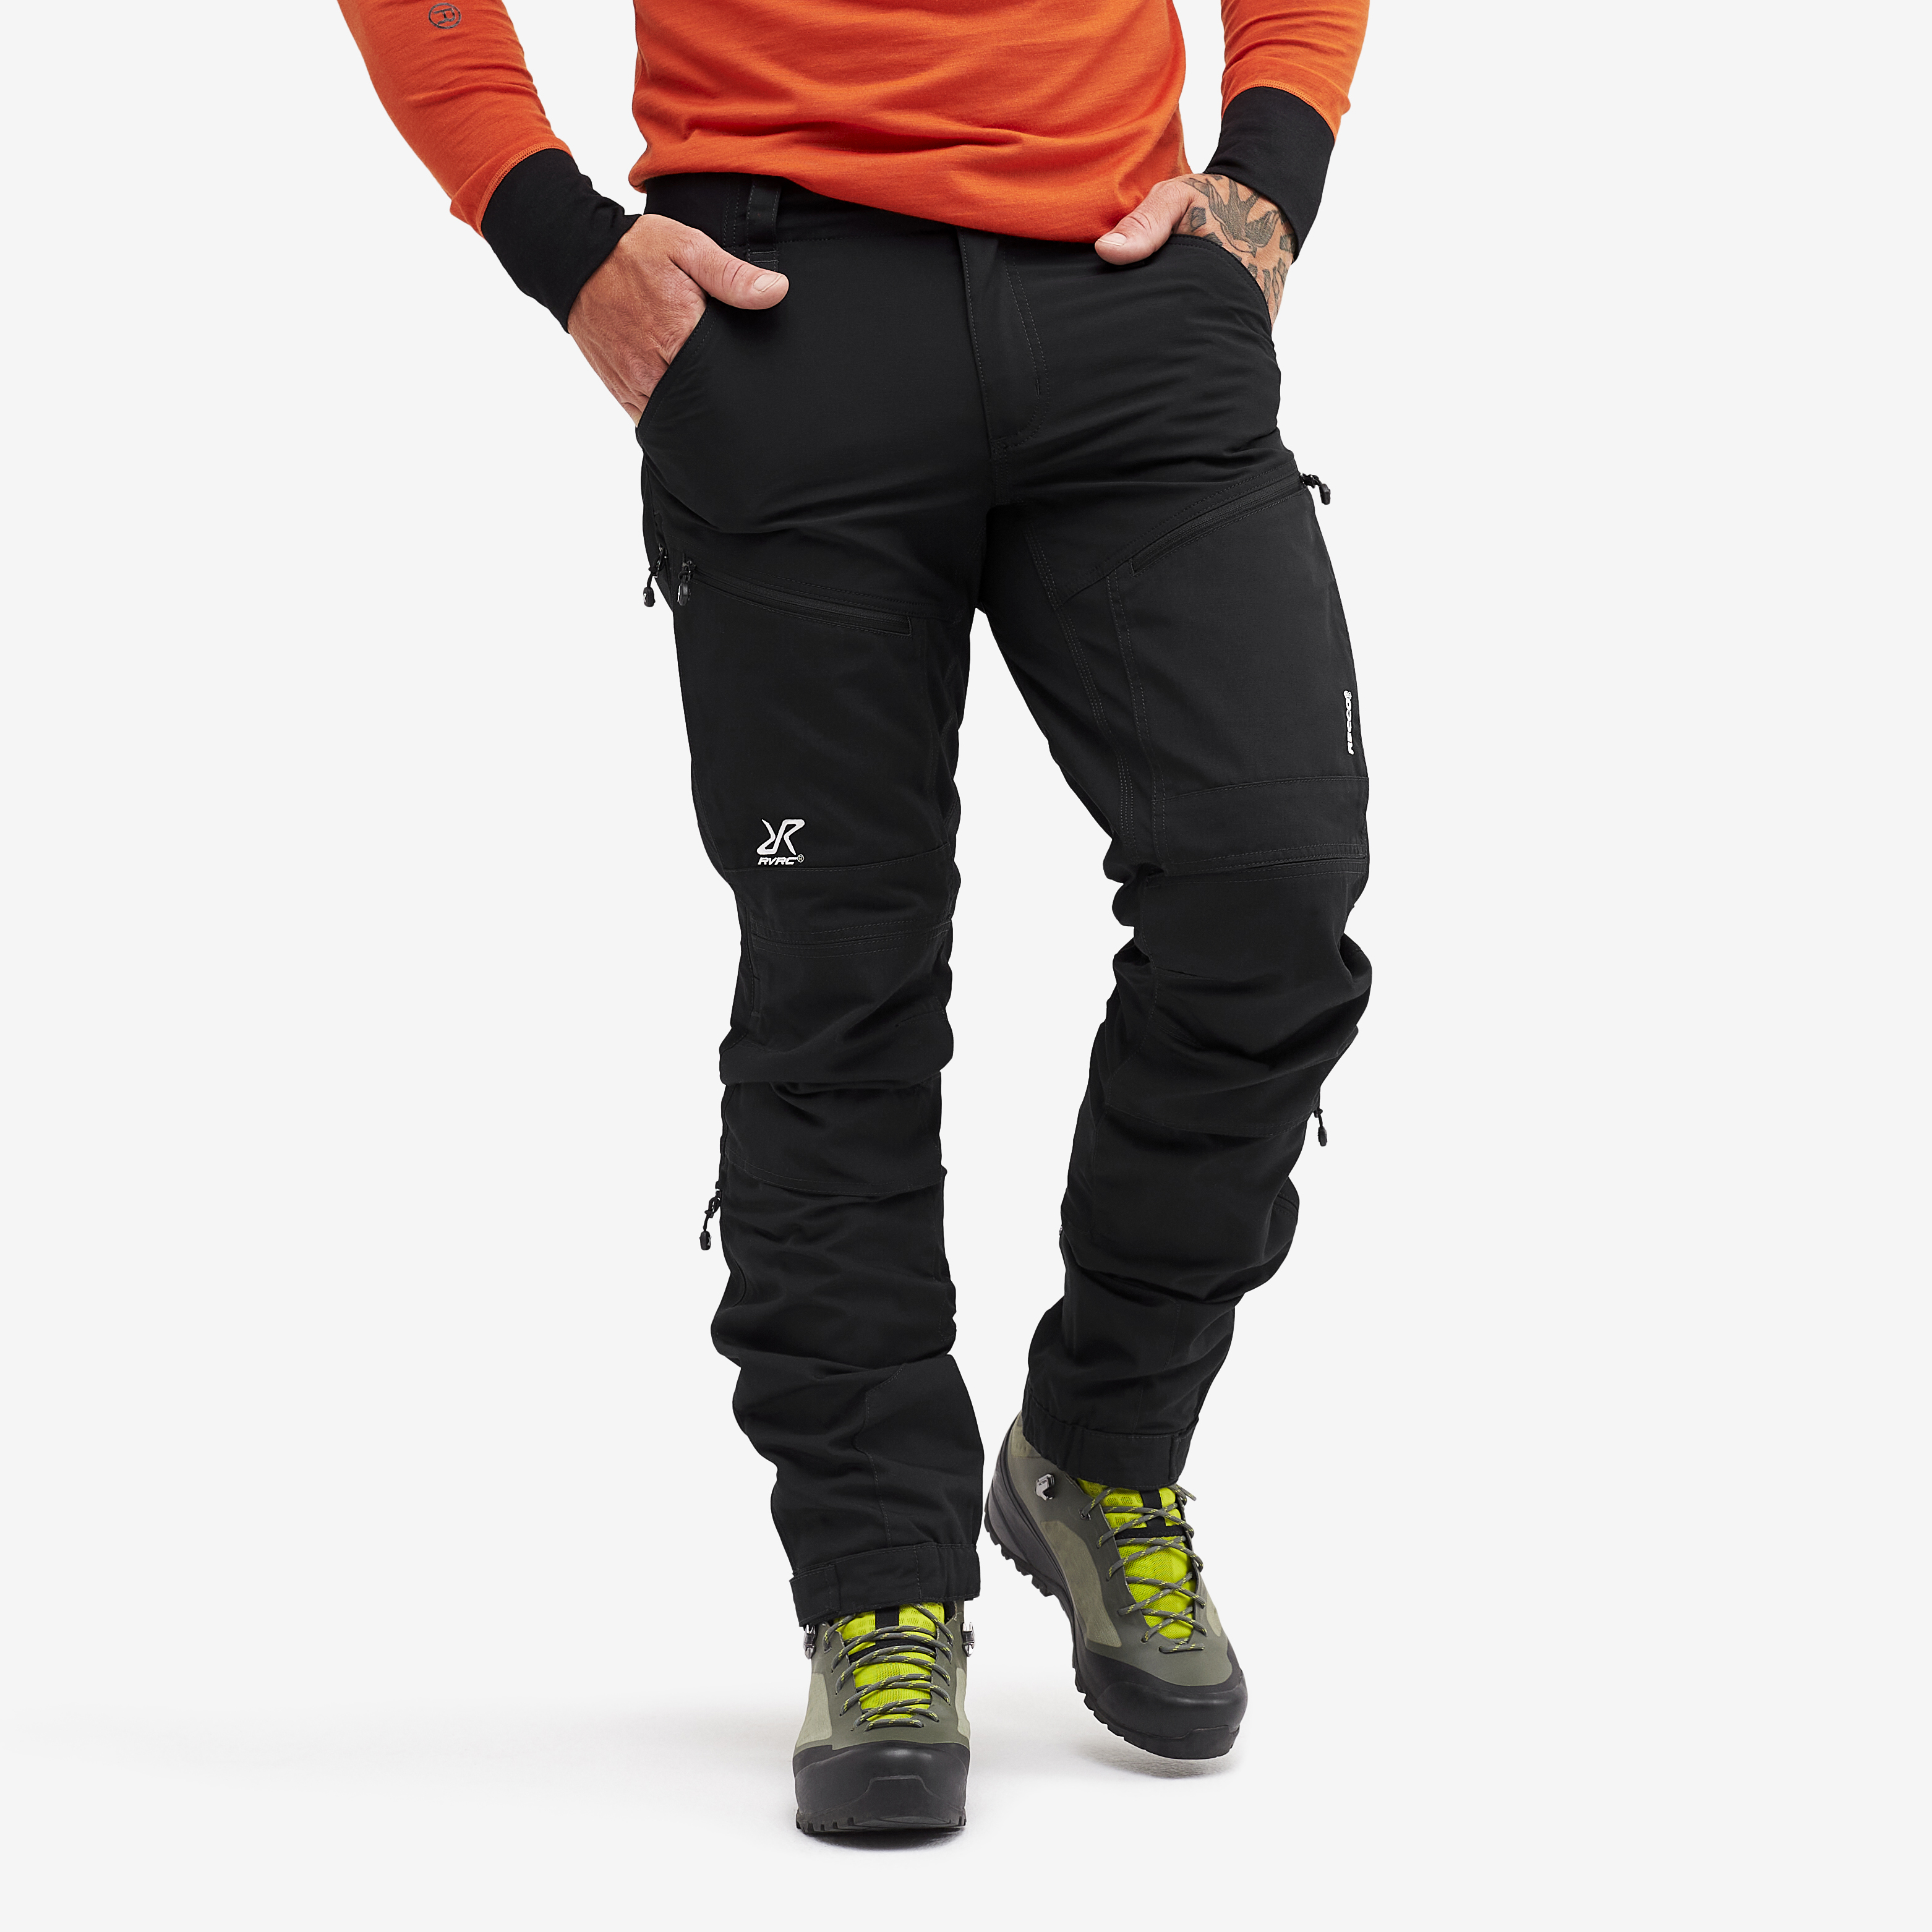 Durable and Ventilated Pants for All Outdoor Activities RevolutionRace Men’s RVRC GP Pro Pants